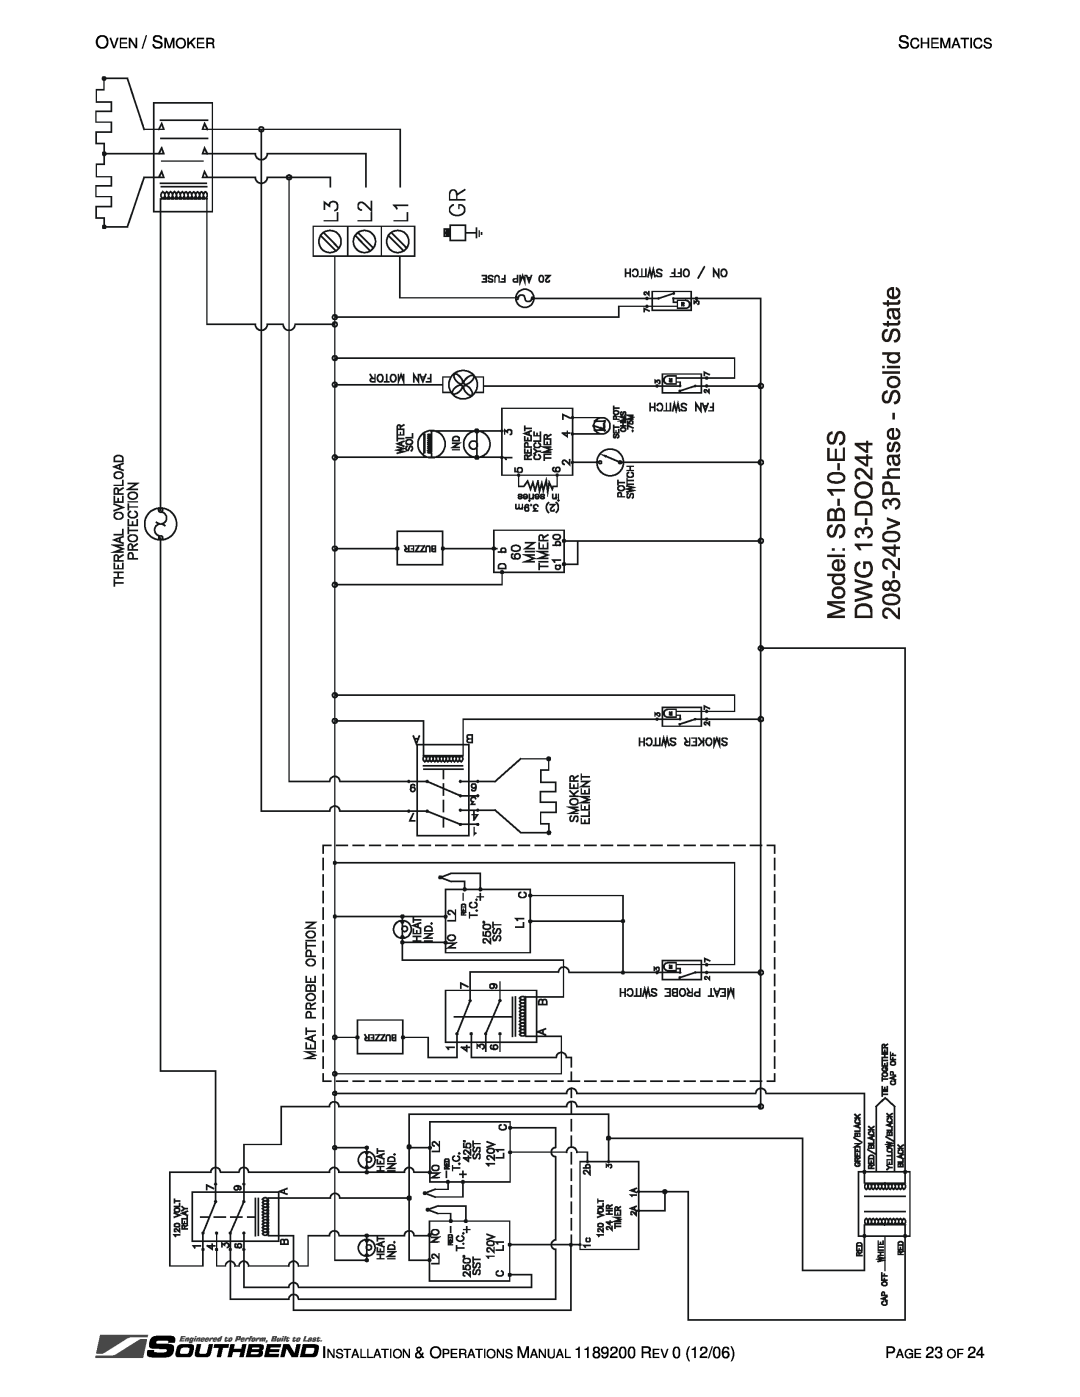 Southbend SB-5-ES, SB-10-ES Oven / Smoker, Schematics, INSTALLATION & OPERATIONS MANUAL 1189200 REV 0 12/06, PAGE 23 OF 